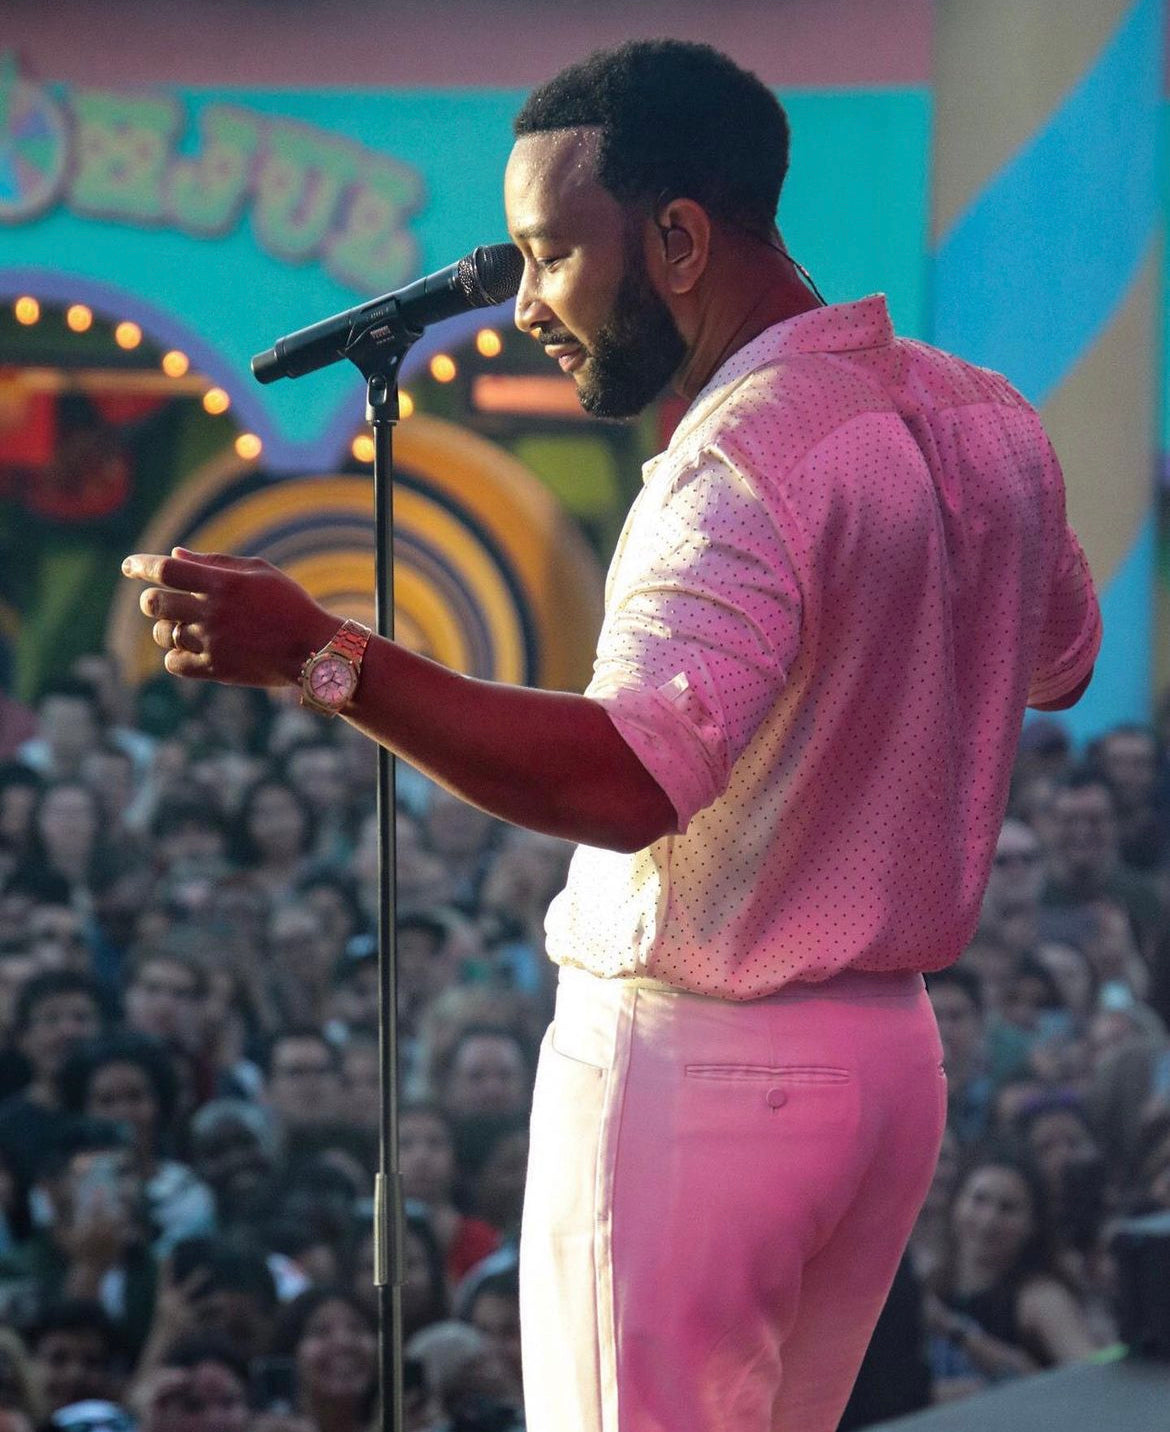 john legend with concert crowd in background